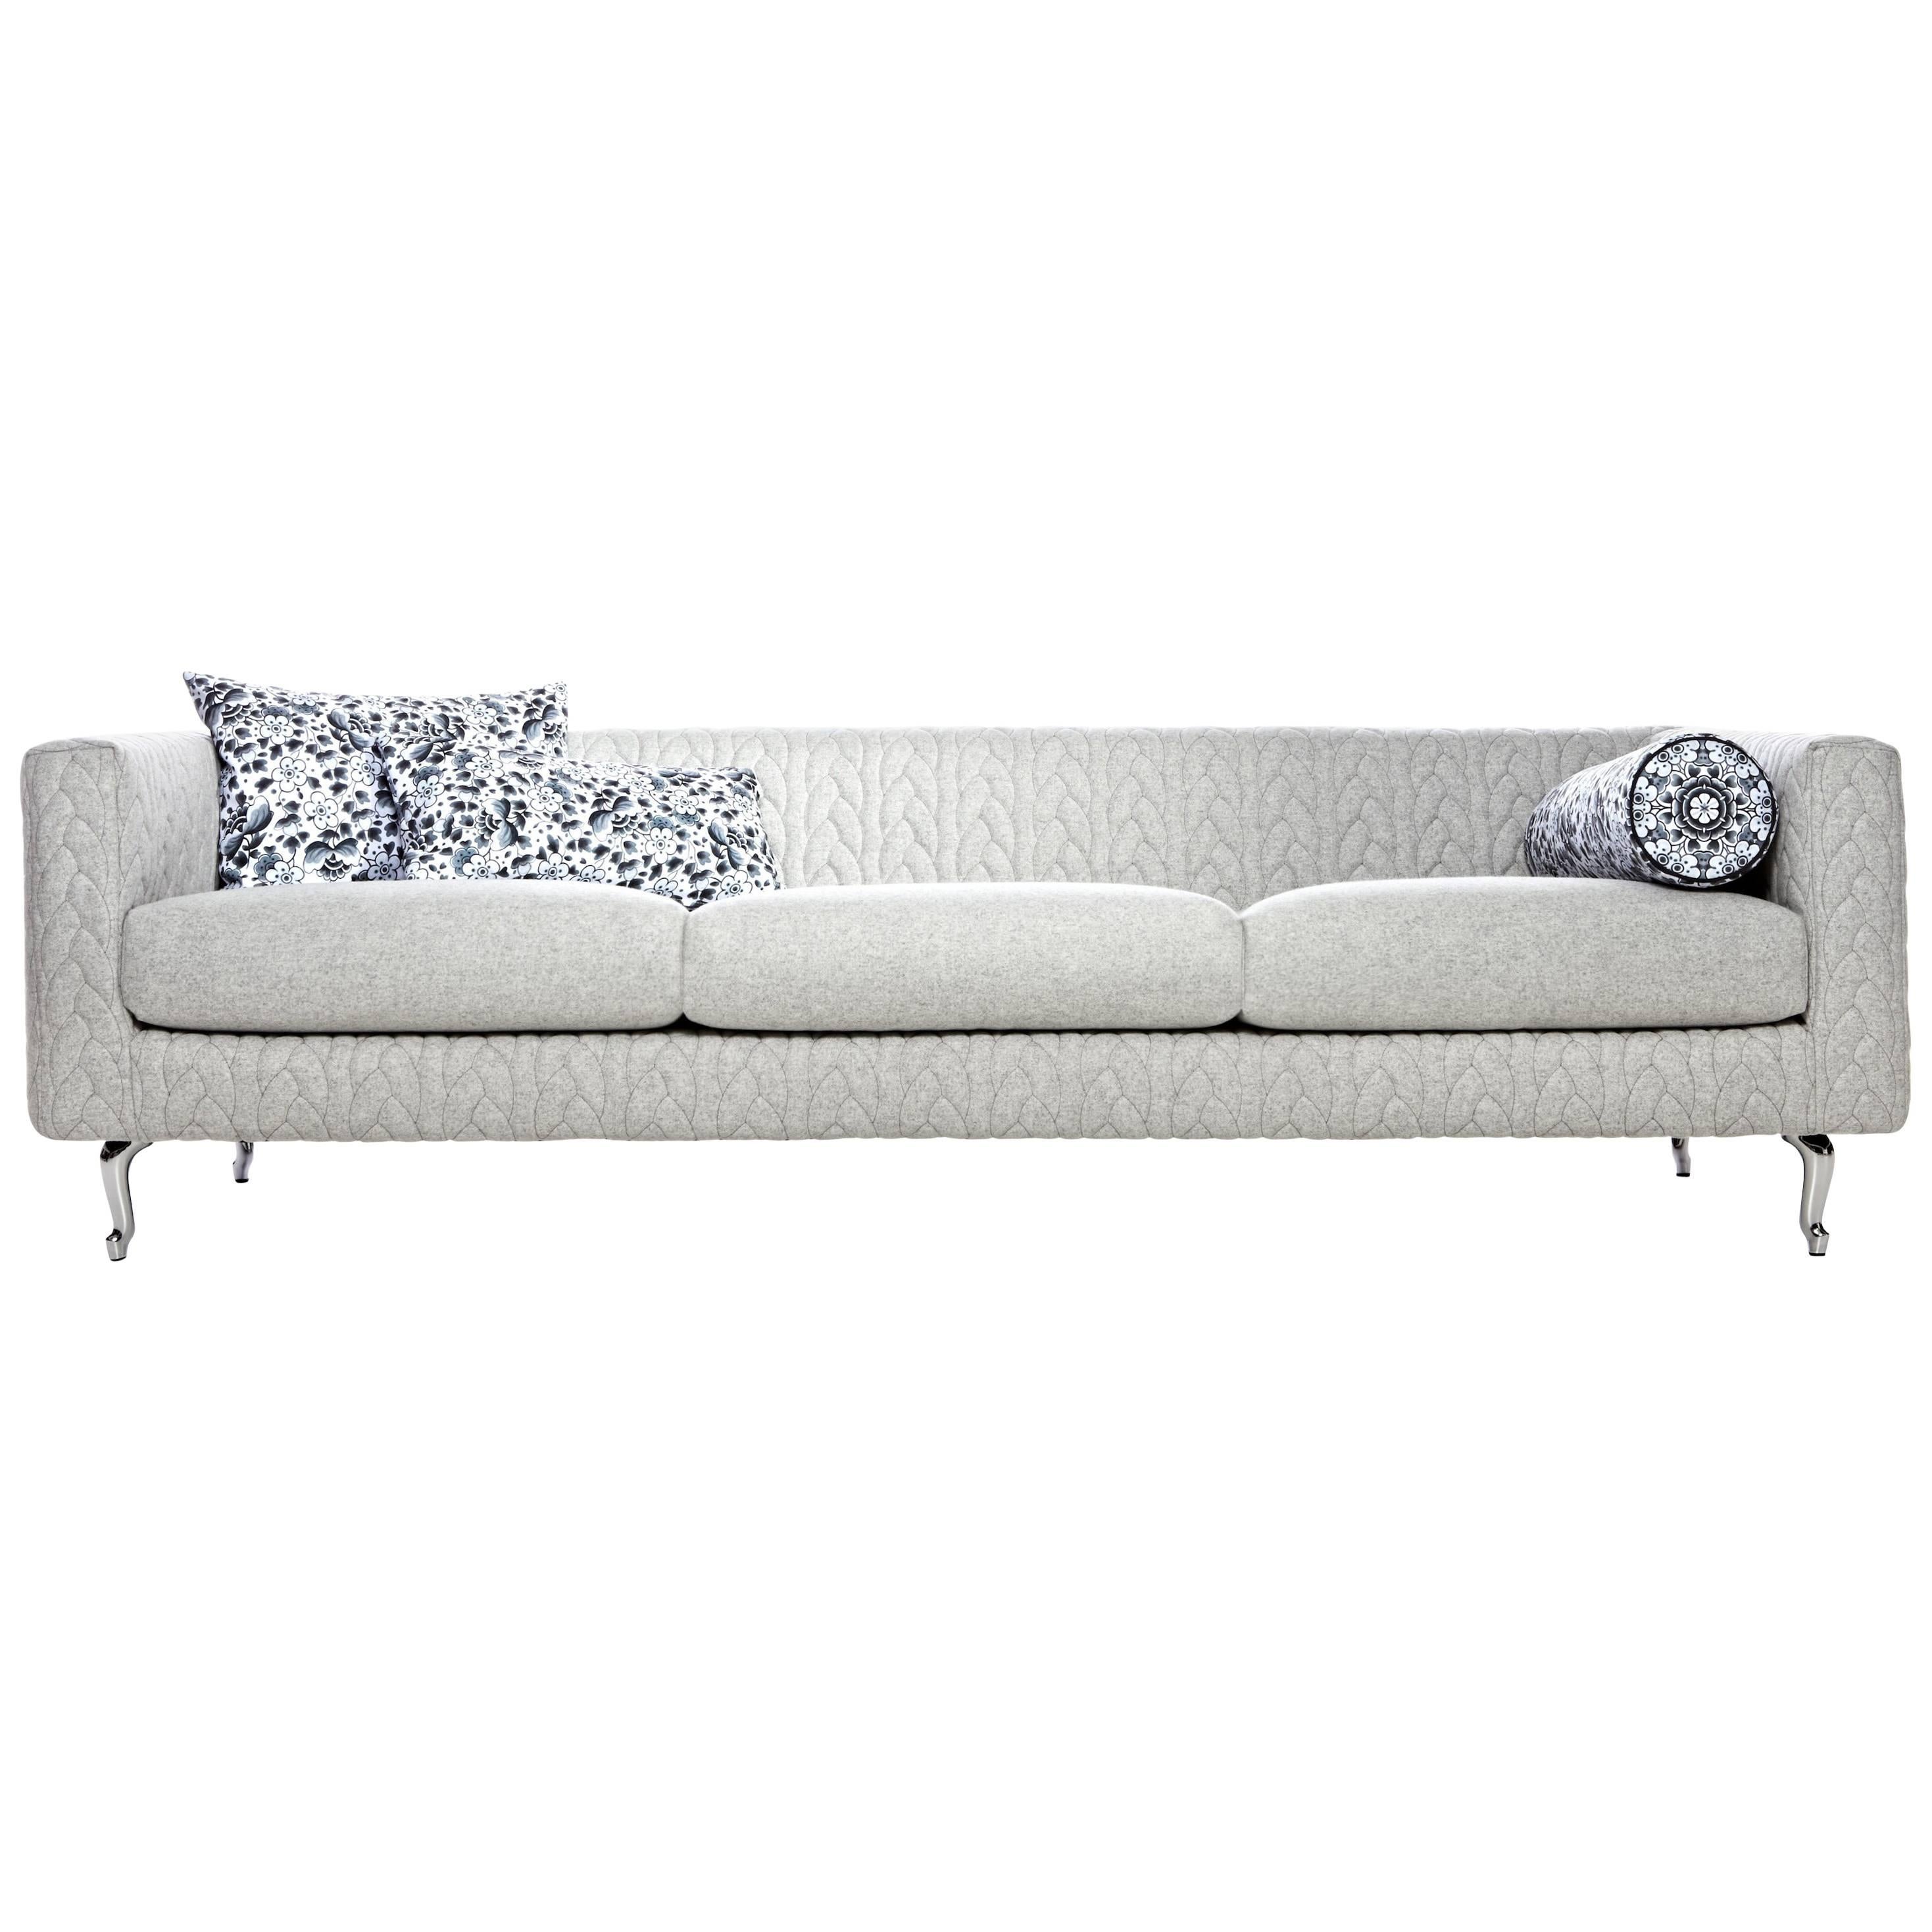 Moooi Boutique Delft Grey Jumper Triple-Seat Sofa by Marcel Wanders For Sale